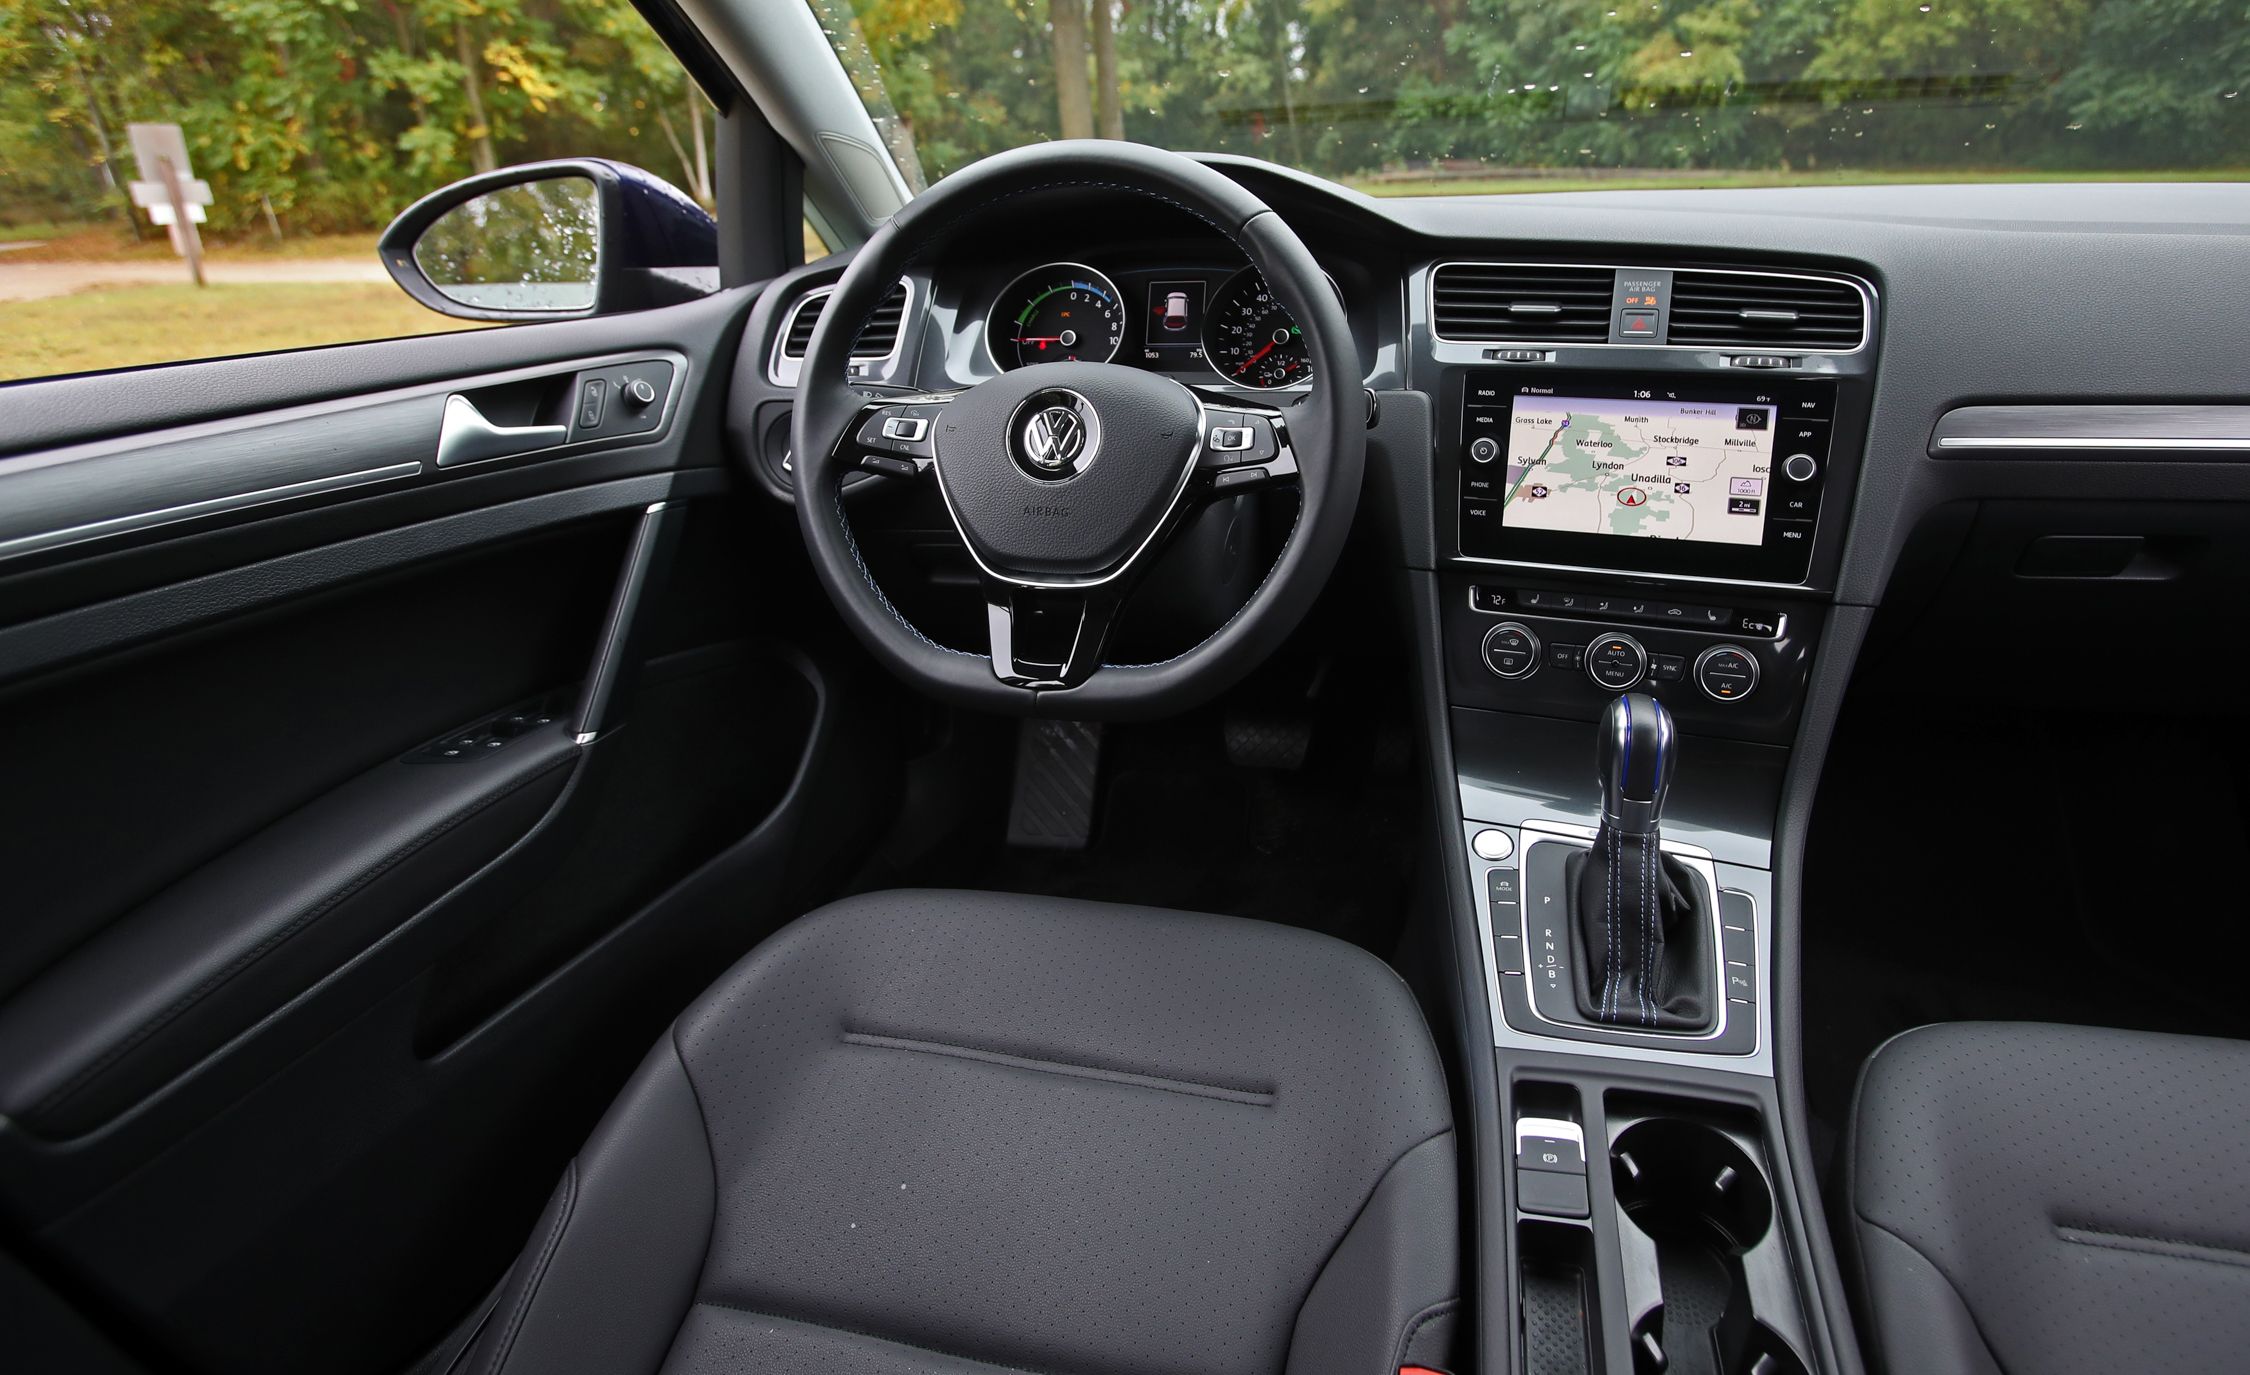 Awesome Volkswagen Egolf Interior And Review The Good Interior